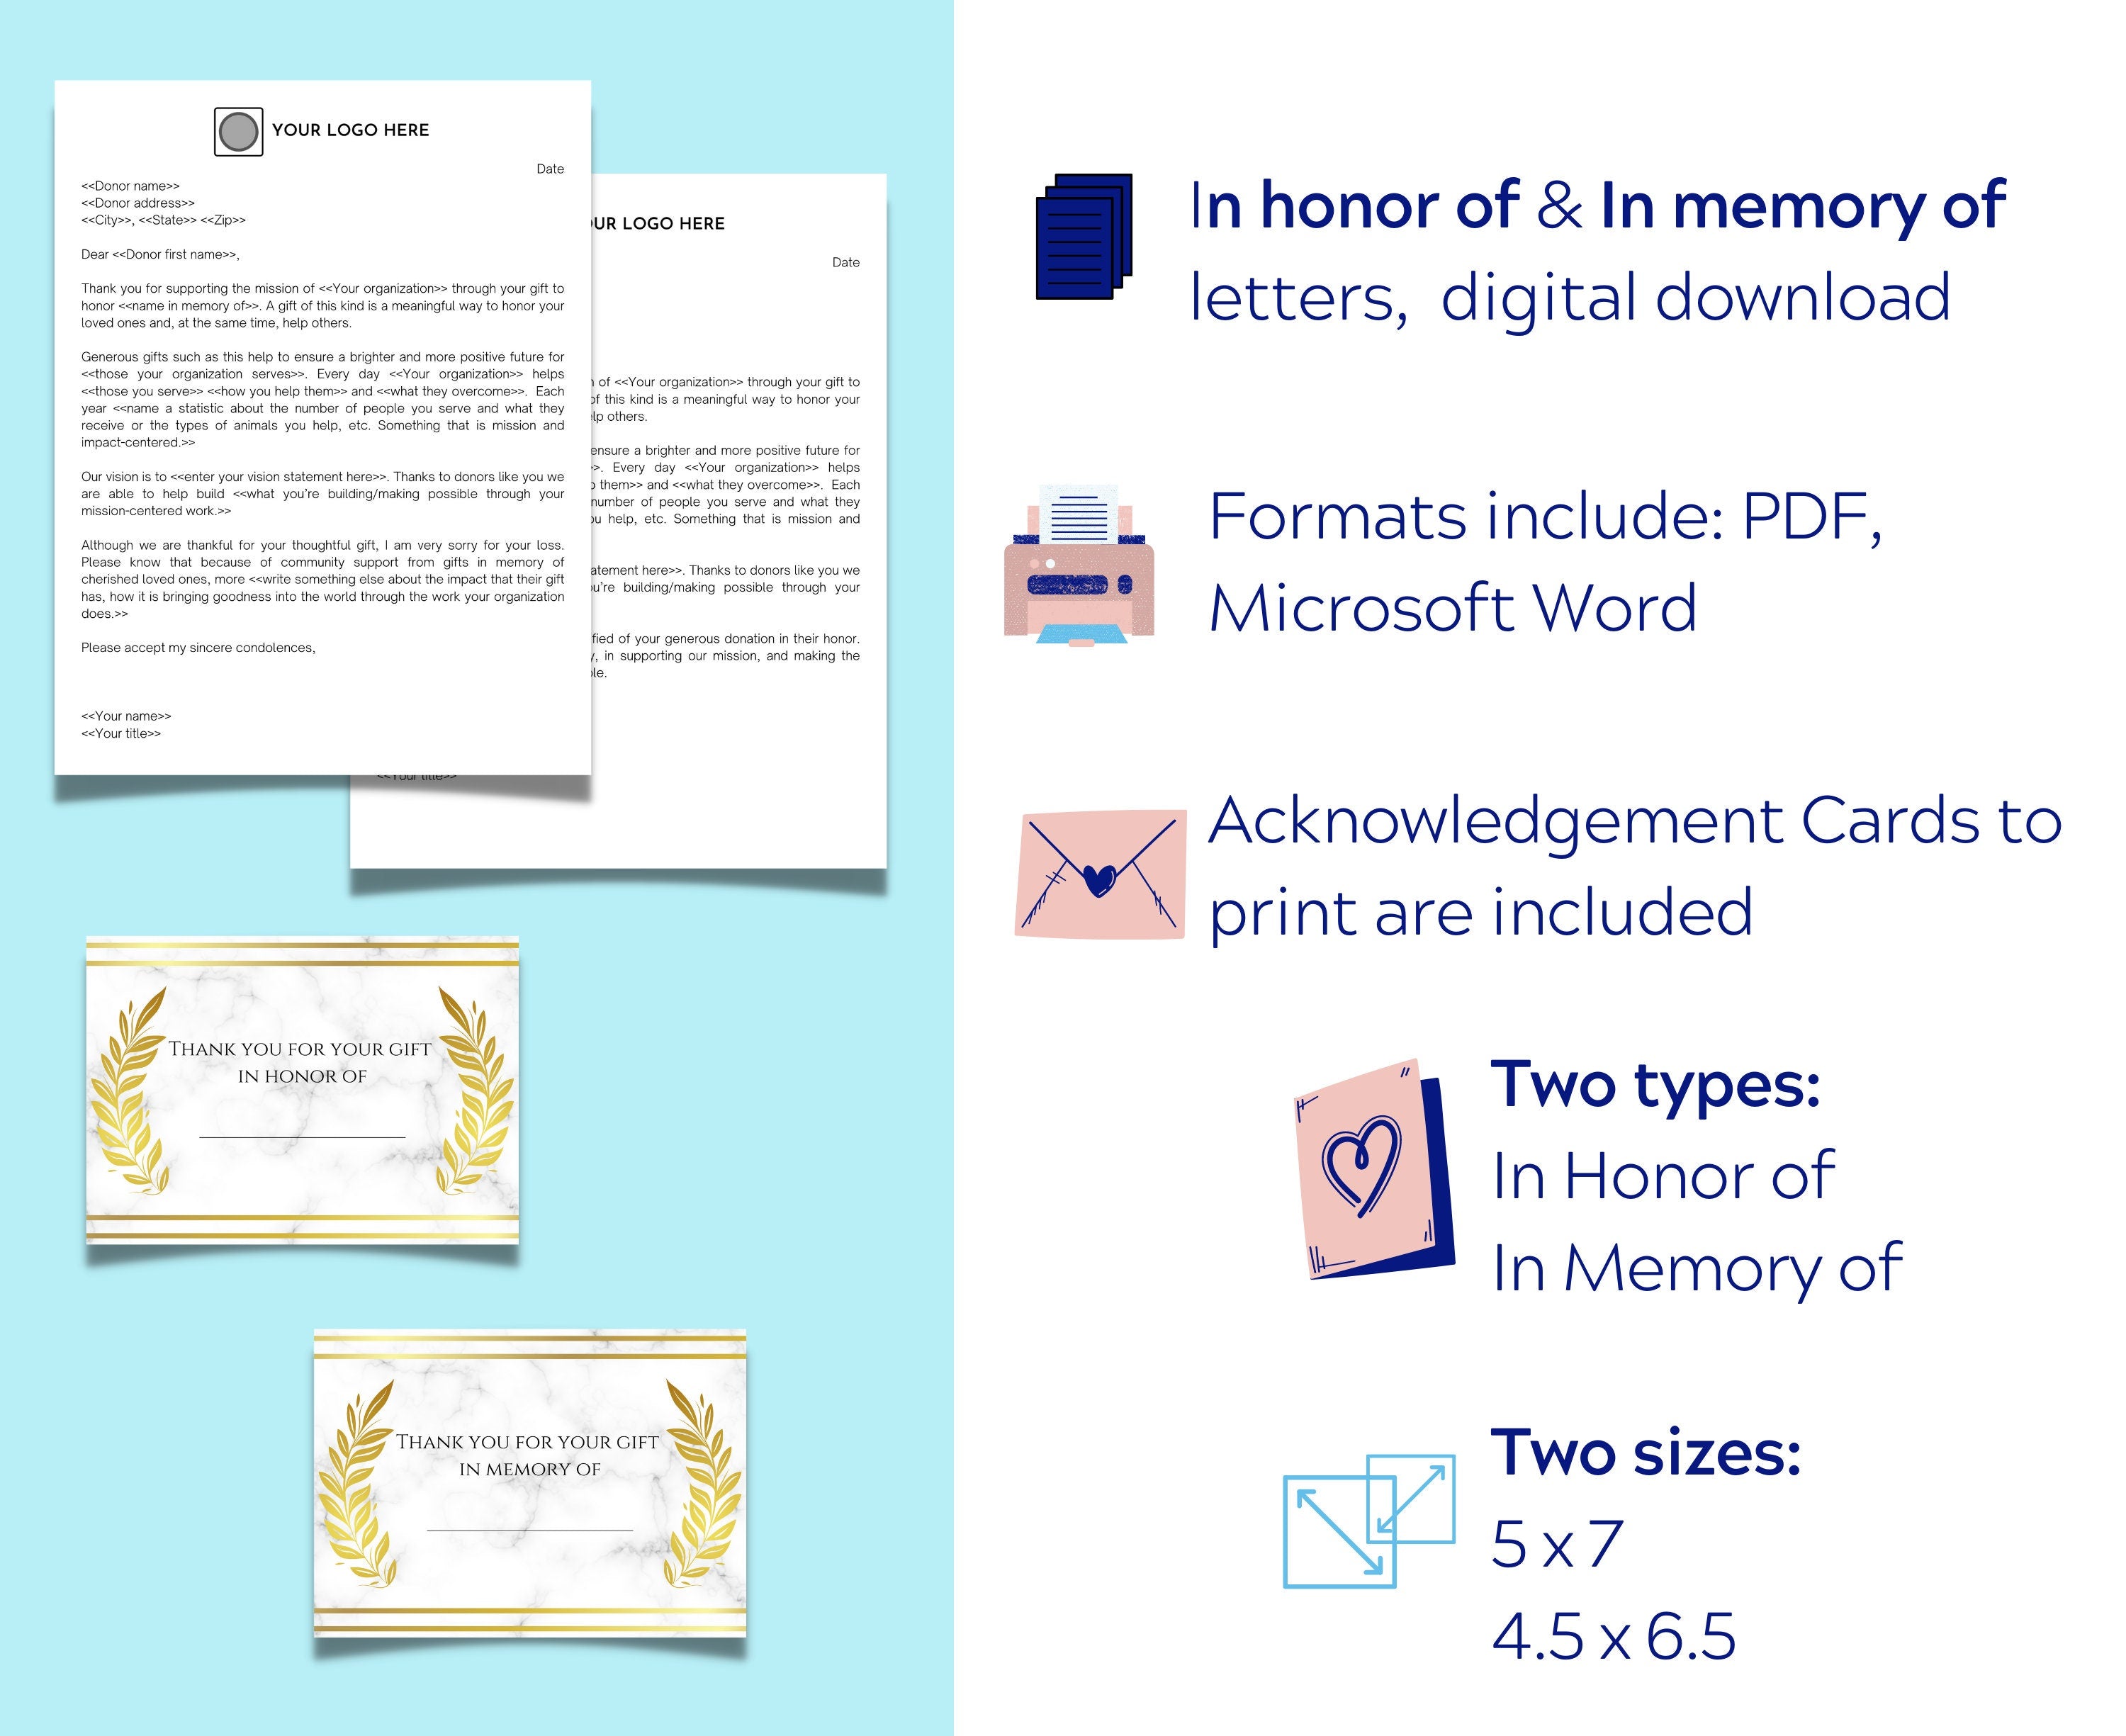 Thank You Letter for Gift - download free documents for PDF, Word and Excel